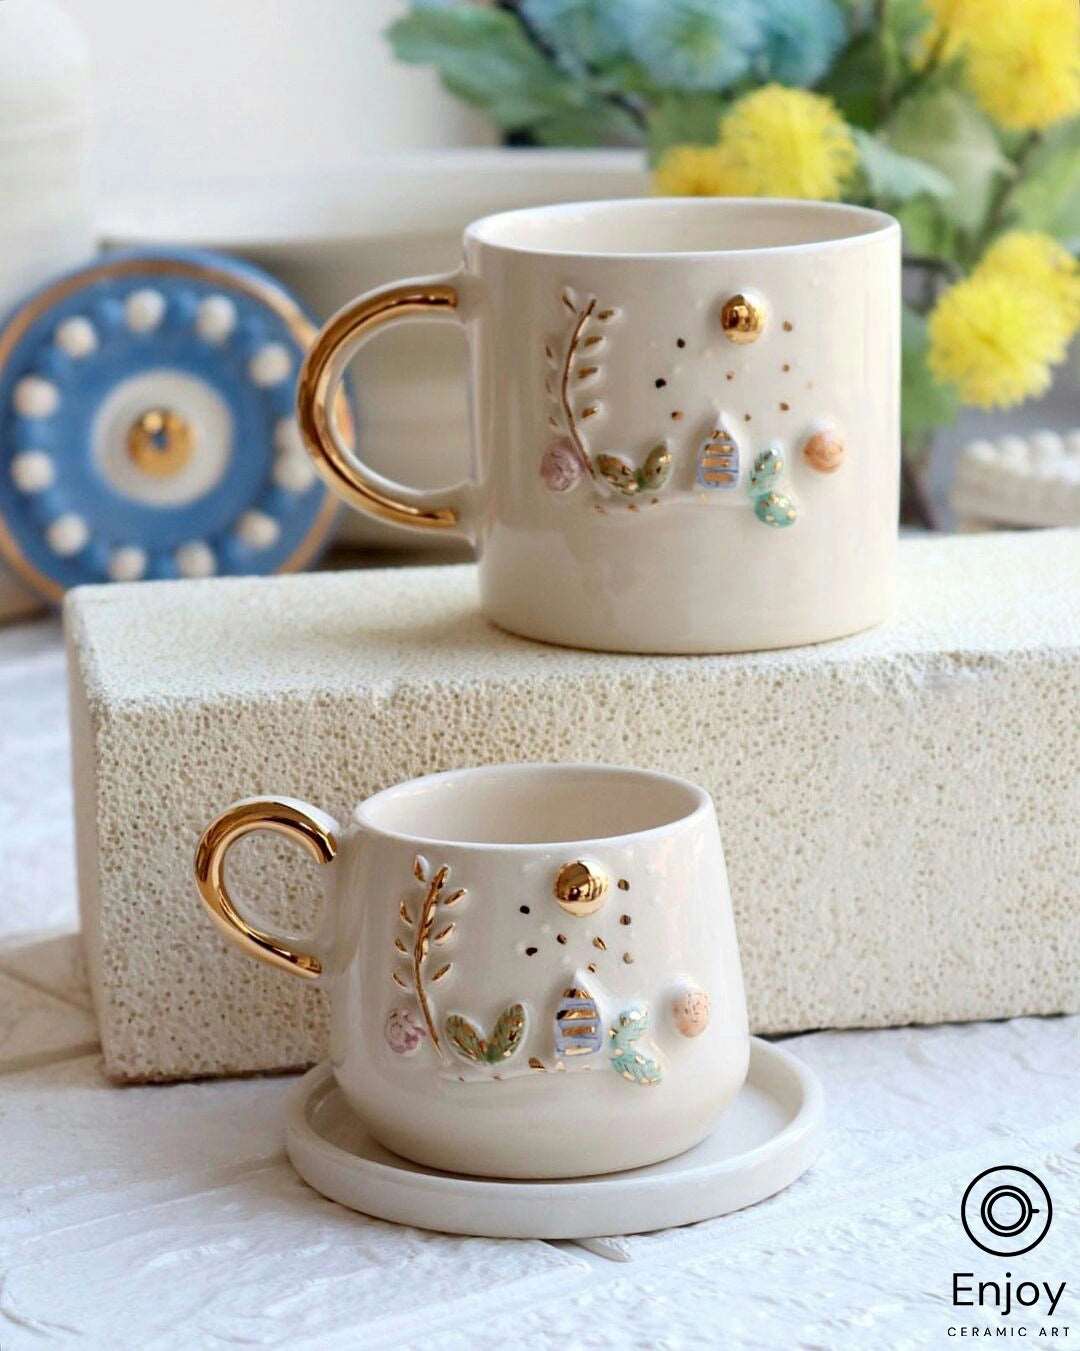  Green and Beige Pottery Mug - Handmade Coffee Cup - Espresso Cup  - Pottery Teacup - Birthday gift - Coffee Sets - Cute Cups : Handmade  Products